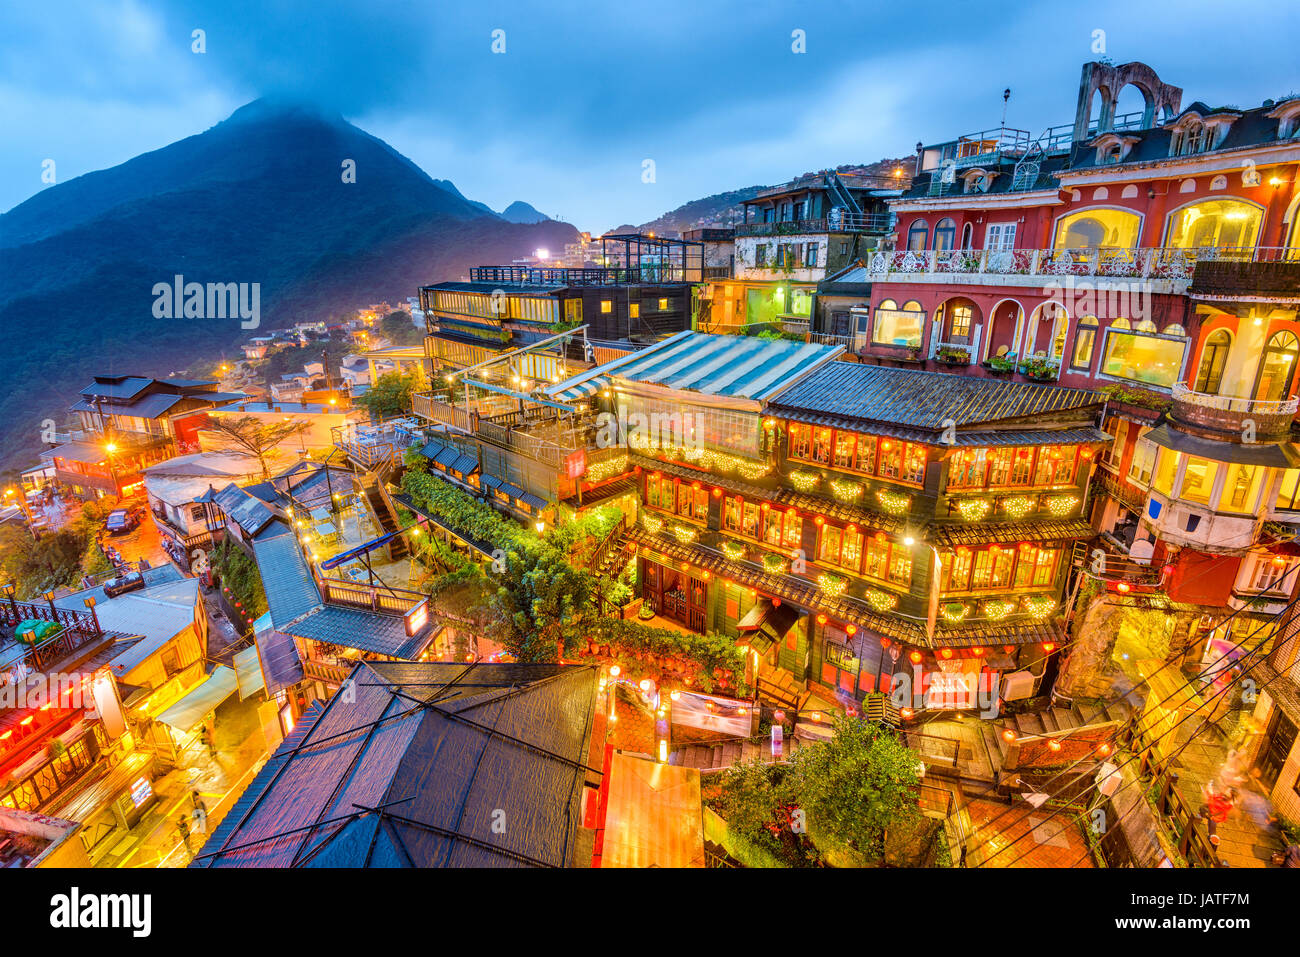 Jiufen, Taiwan hillside with old teahouses at dusk. Stock Photo